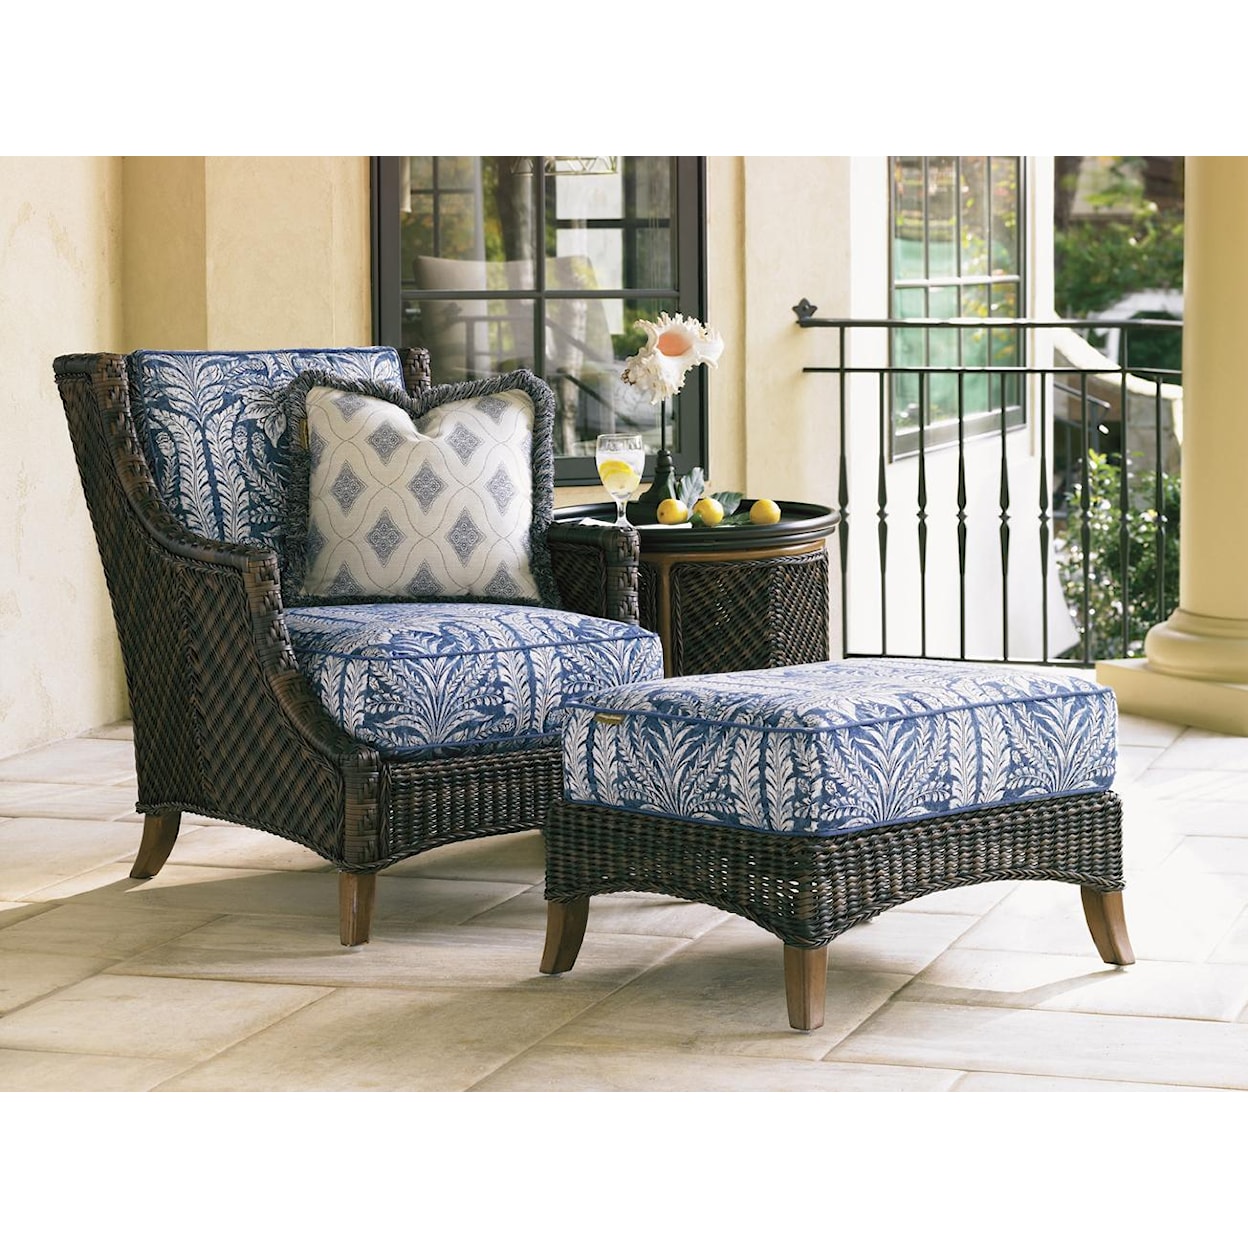 Tommy Bahama Outdoor Living Island Estate Lanai Lounge Chair and Ottoman Set with Table